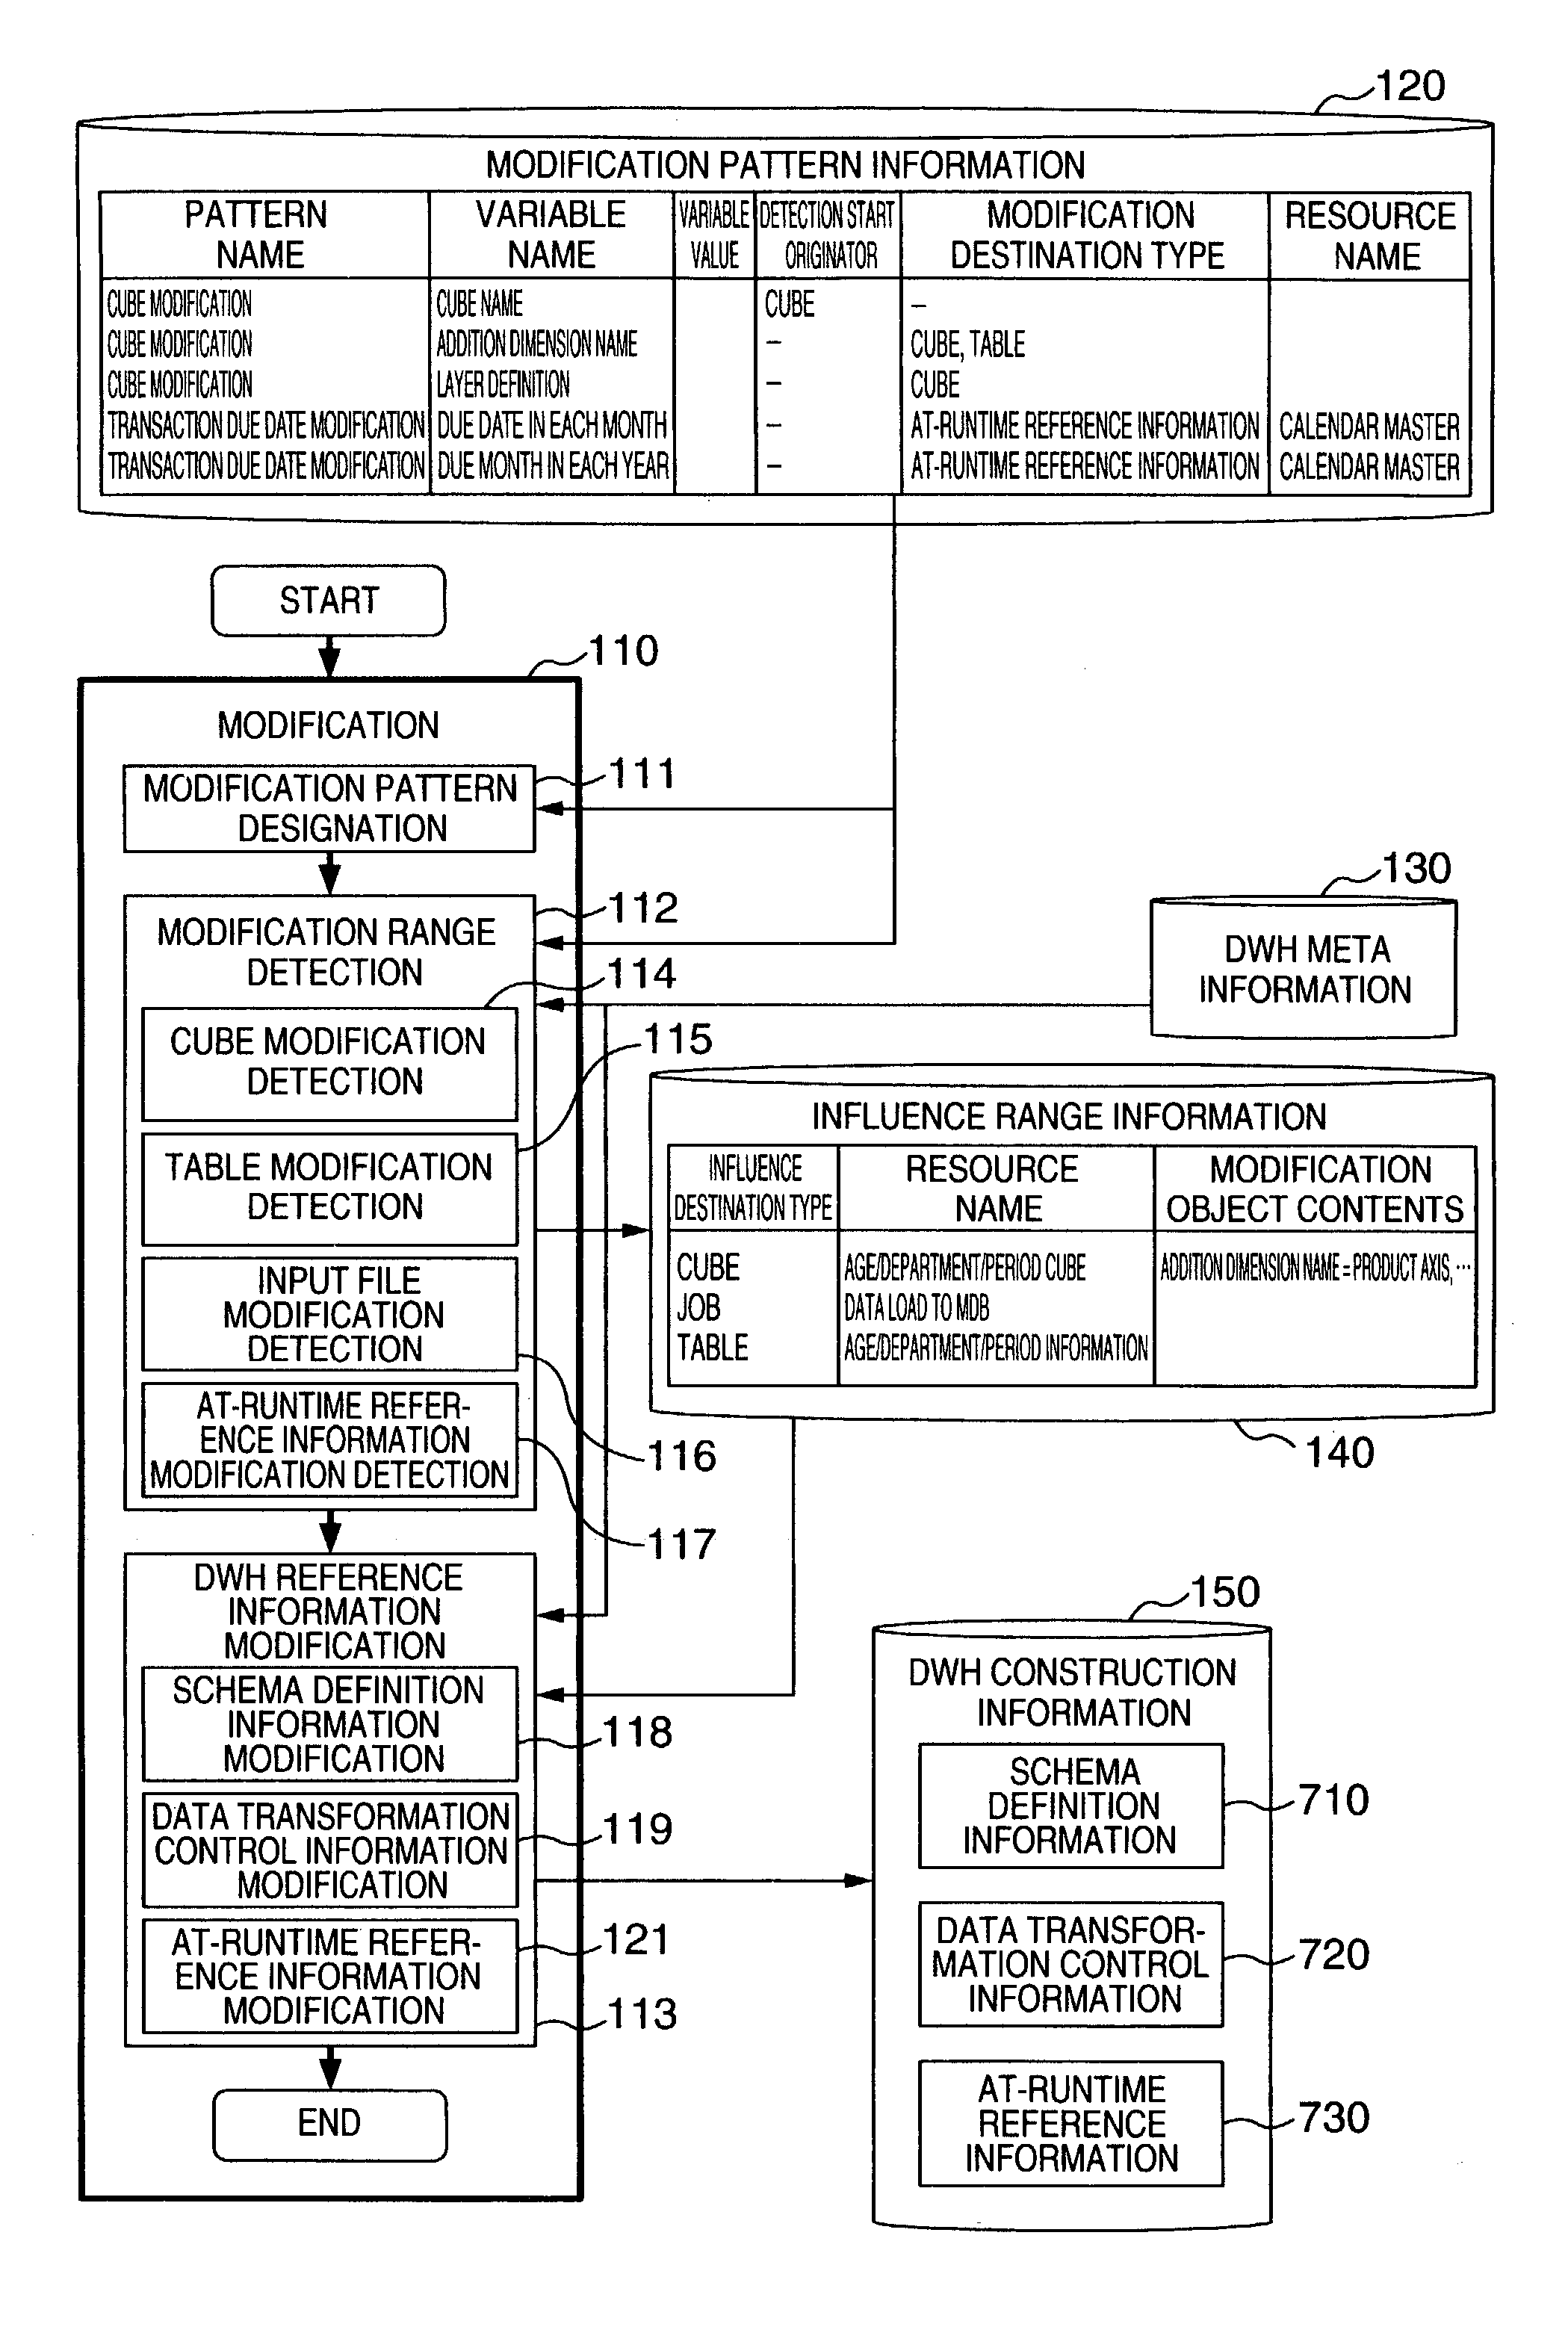 Method for changing database construction information